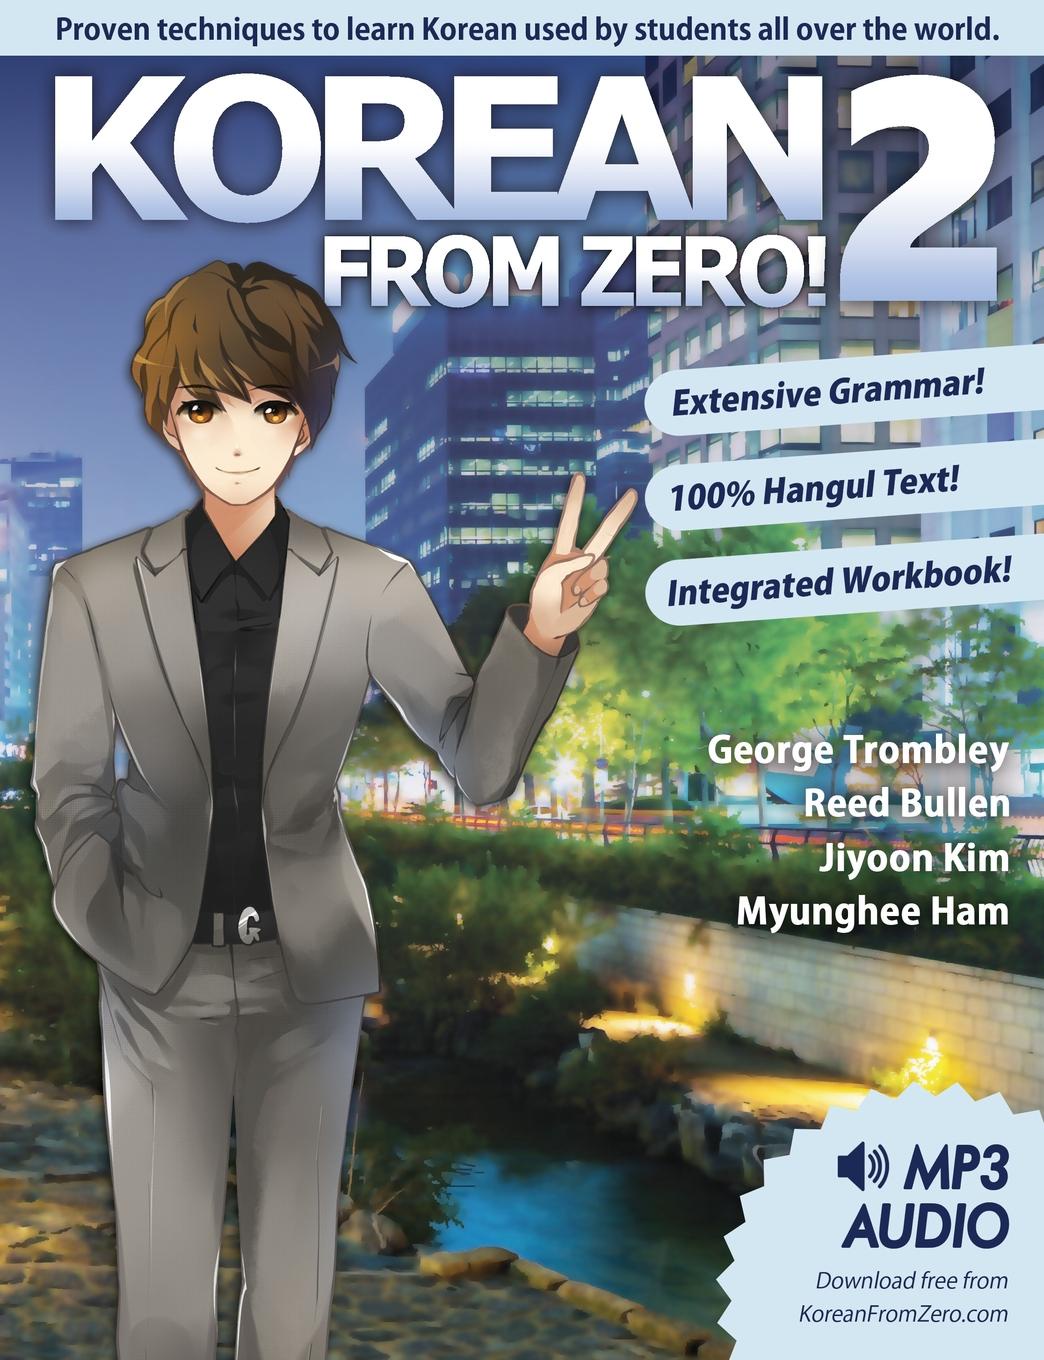 Korean From Zero. 2. Continue Mastering the Korean Language with Integrated Workbook and Online Course